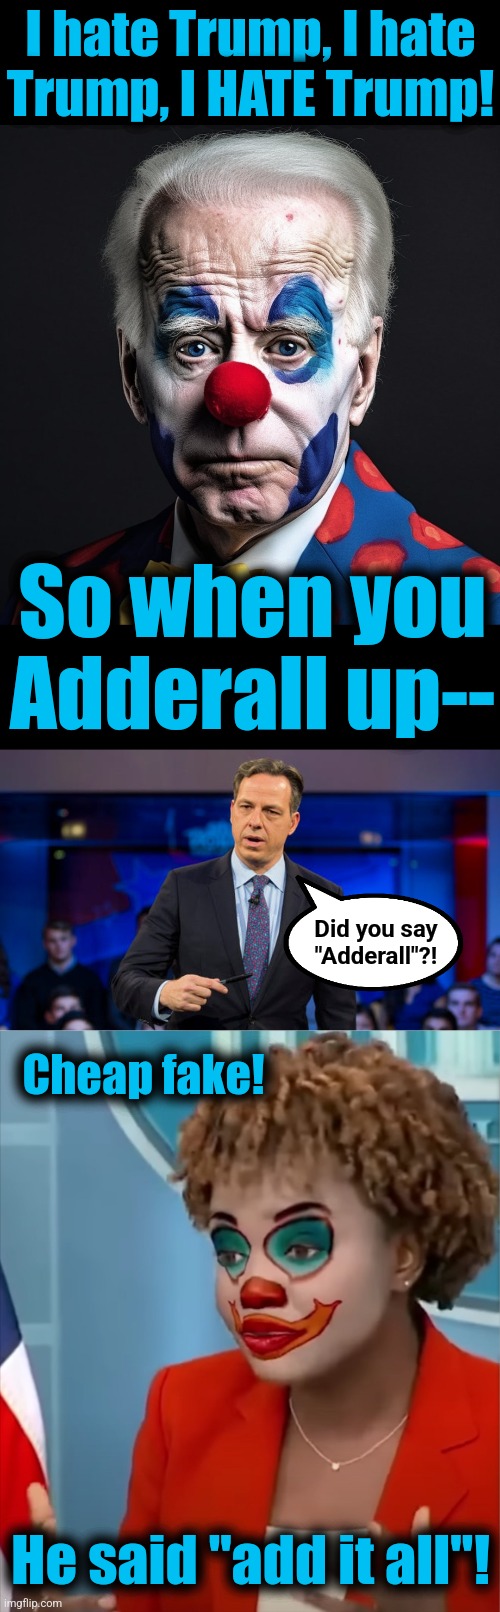 My expectation for the debate | I hate Trump, I hate
Trump, I HATE Trump! So when you
Adderall up--; Did you say
"Adderall"?! Cheap fake! He said "add it all"! | image tagged in press clown,memes,adderall joe,joe biden,debate,democrats | made w/ Imgflip meme maker